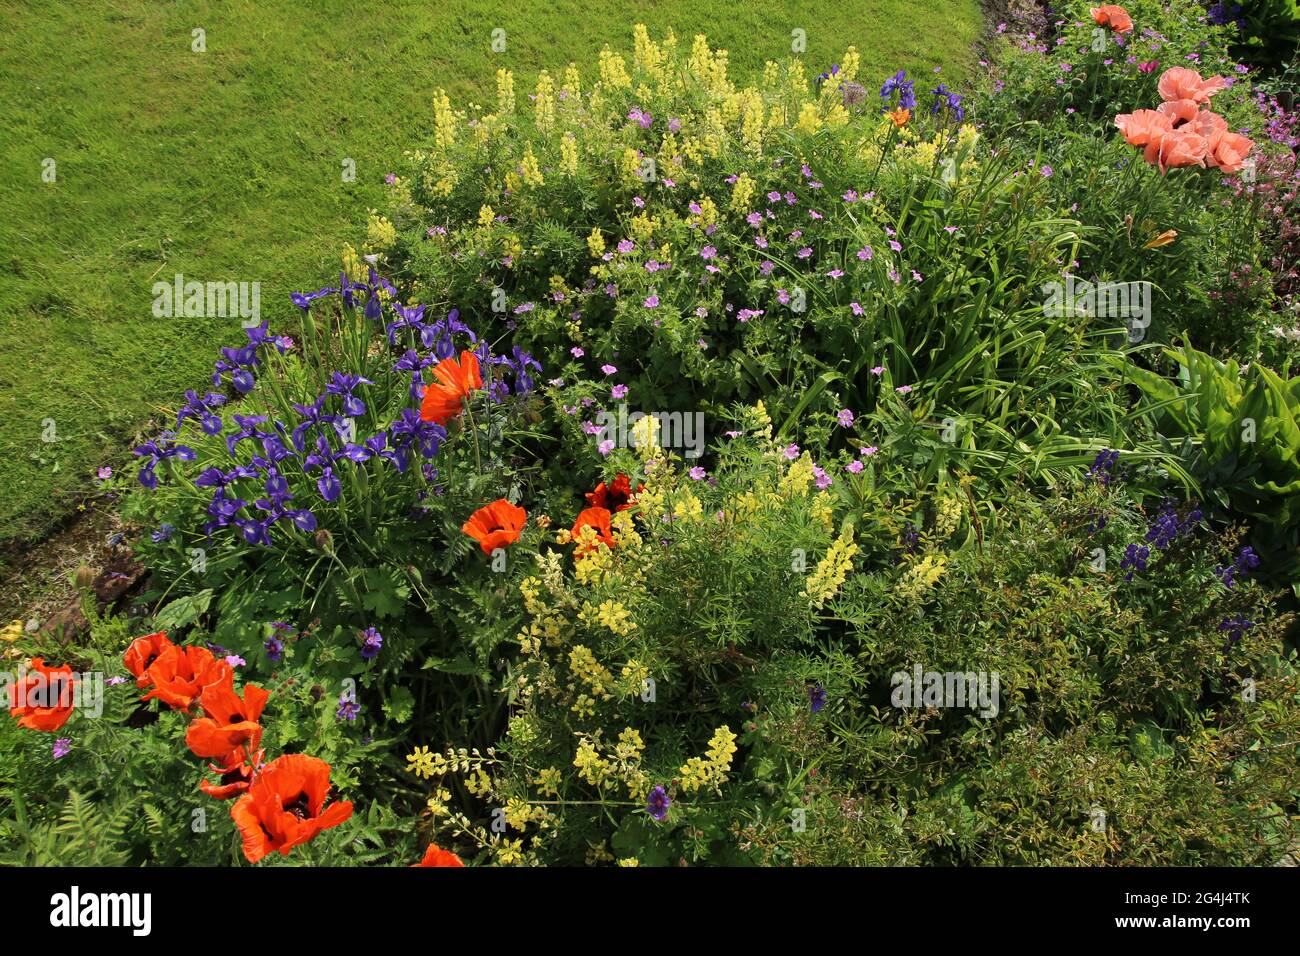 Plants in blossom in garden during summertime featuring yellow lupins and orange poppies amongst others Stock Photo